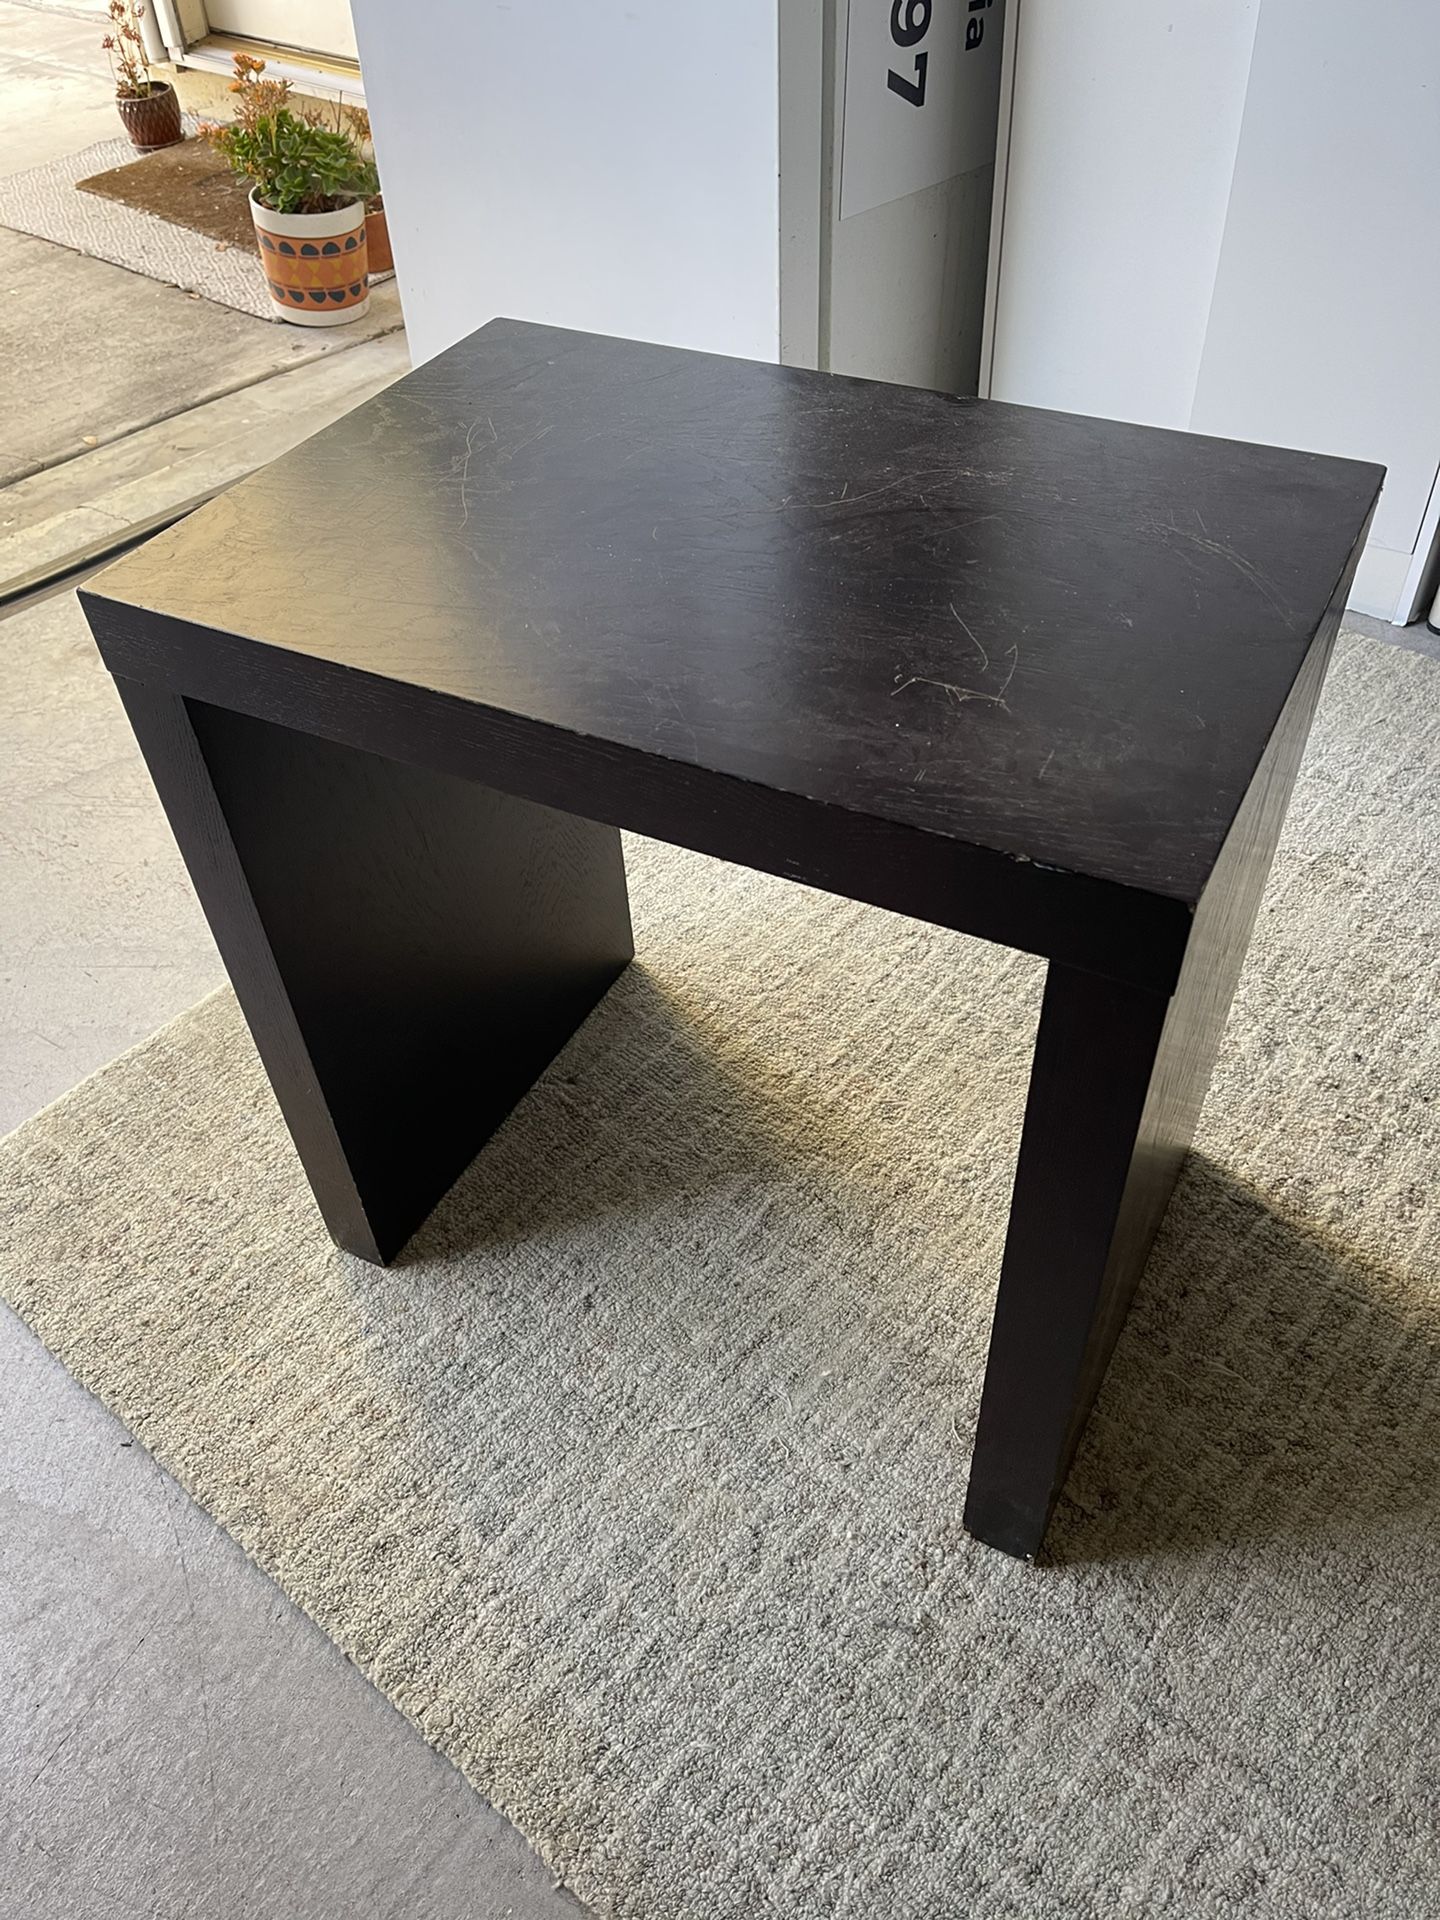 Stand / Shelf / End Table